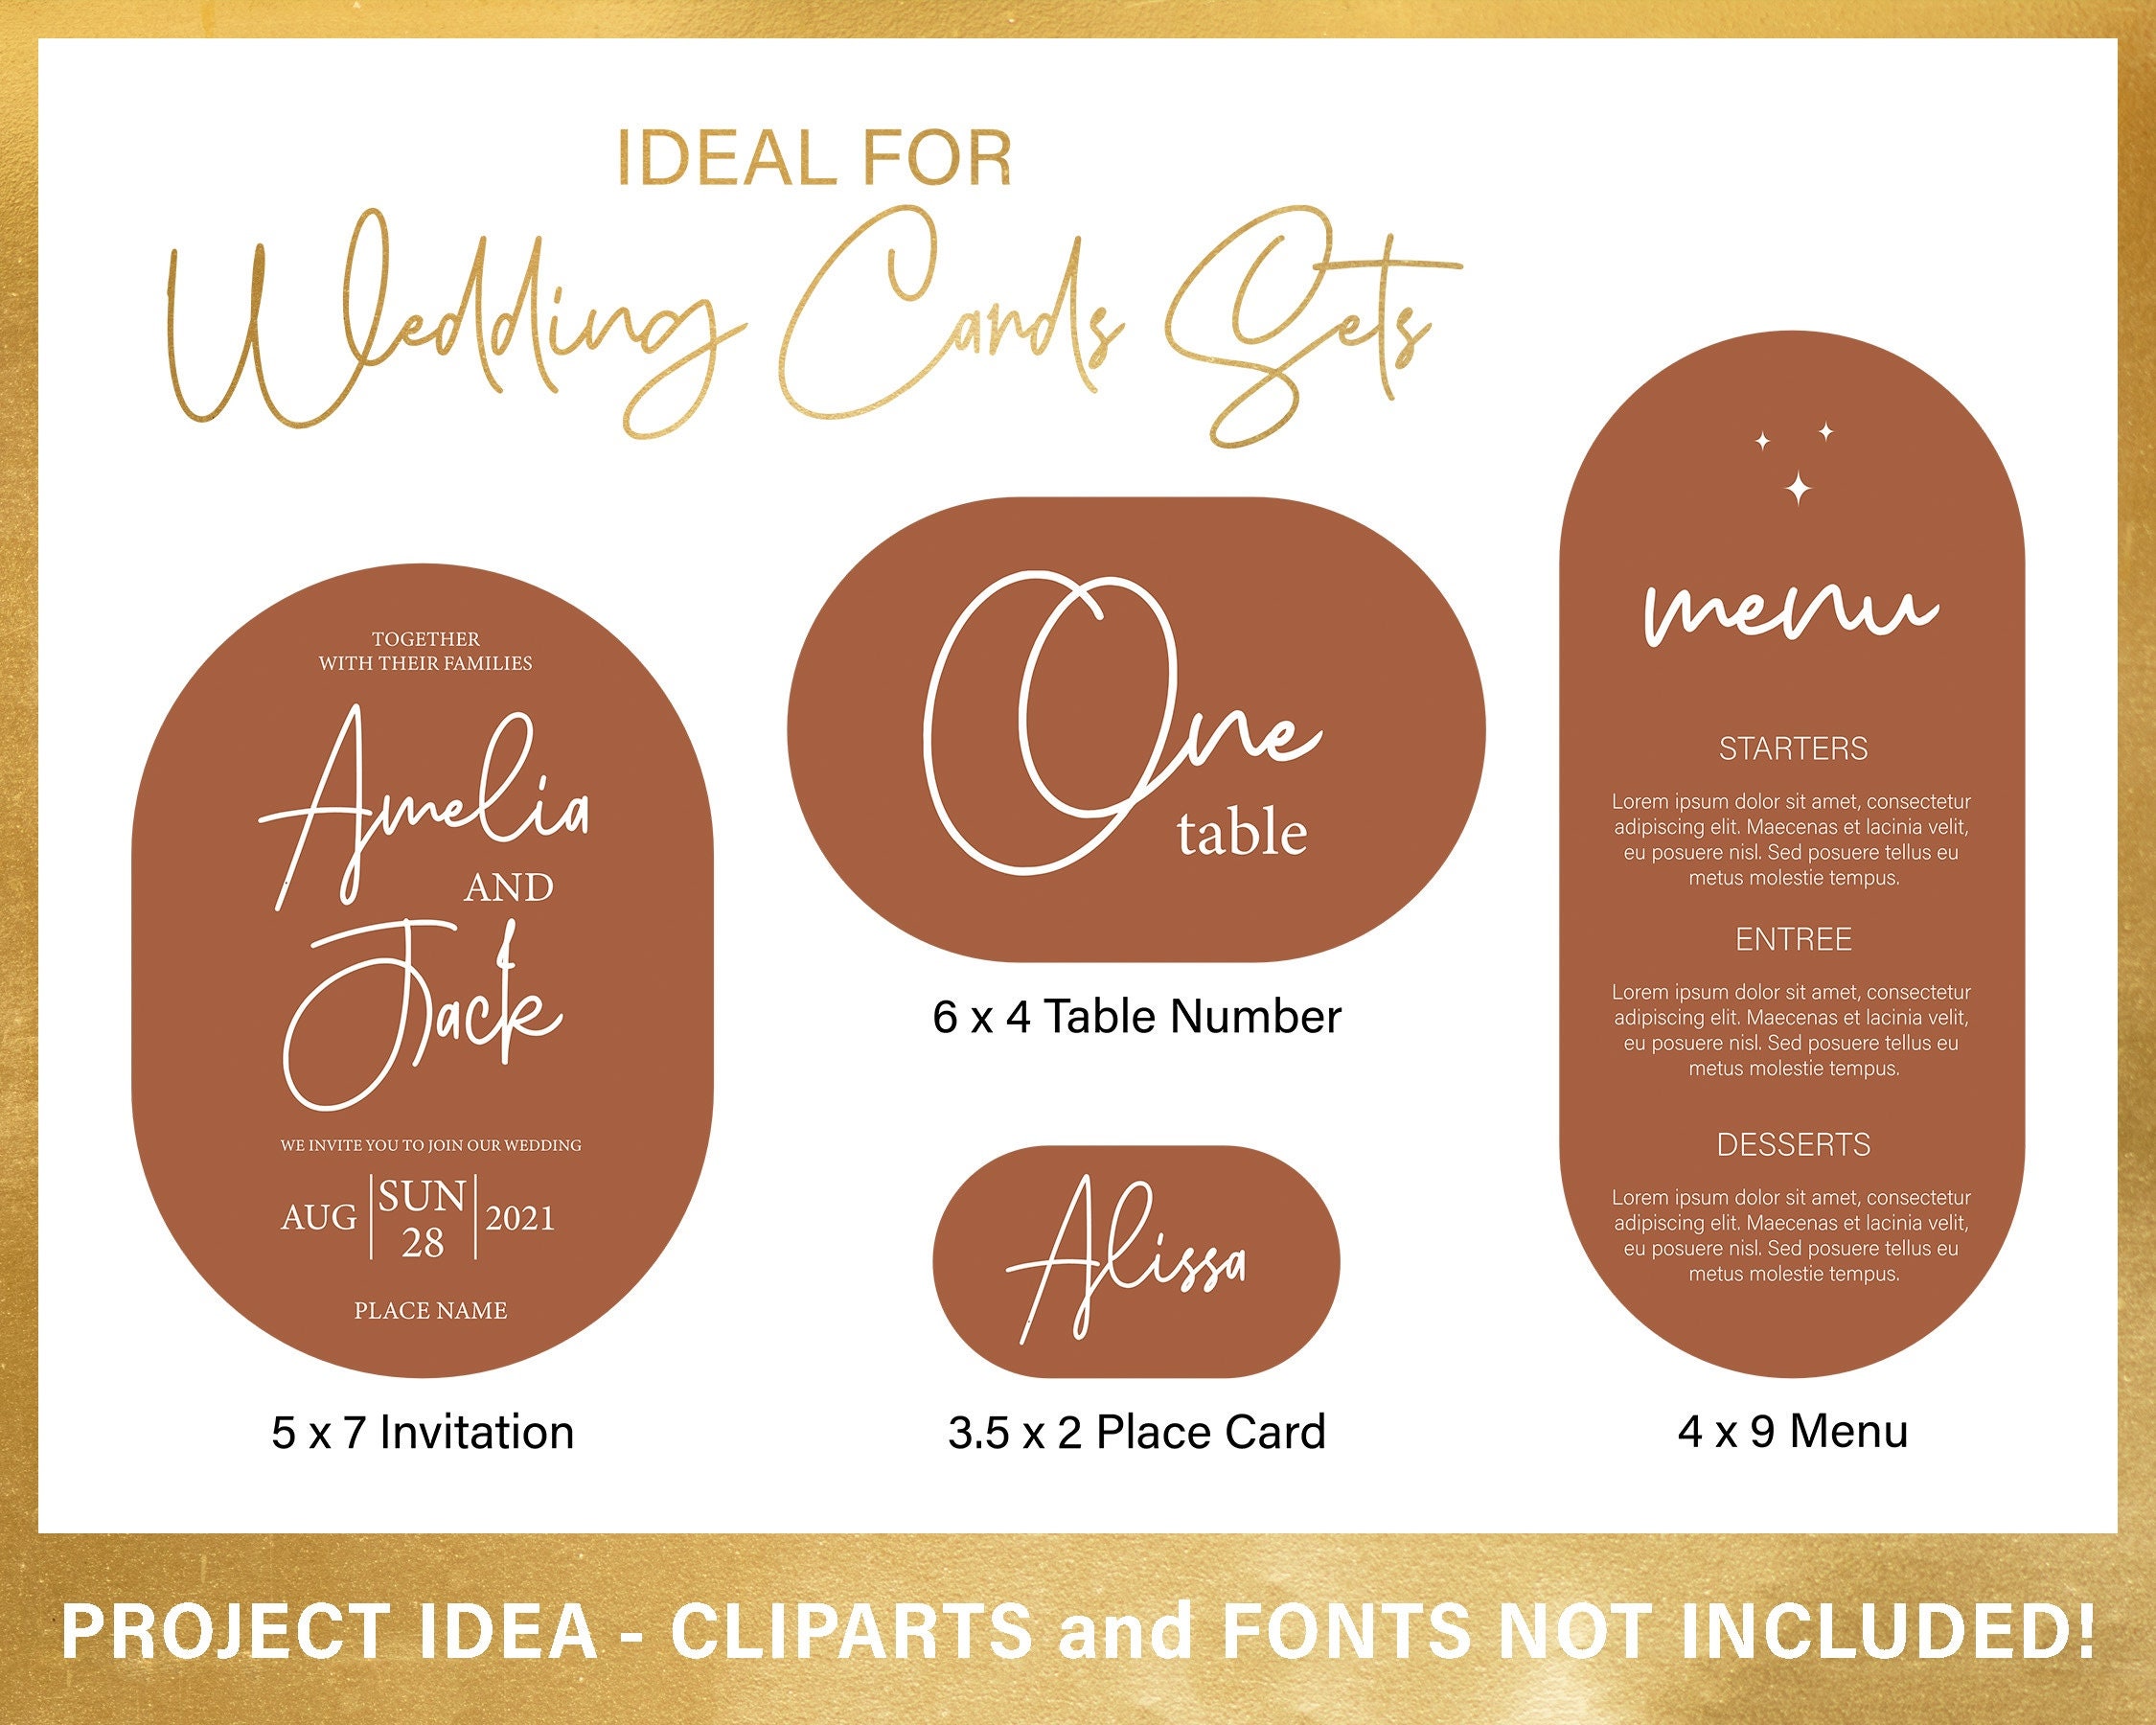 White Cardstock Arch Die Cuts White Paper Arches Choose Size Die